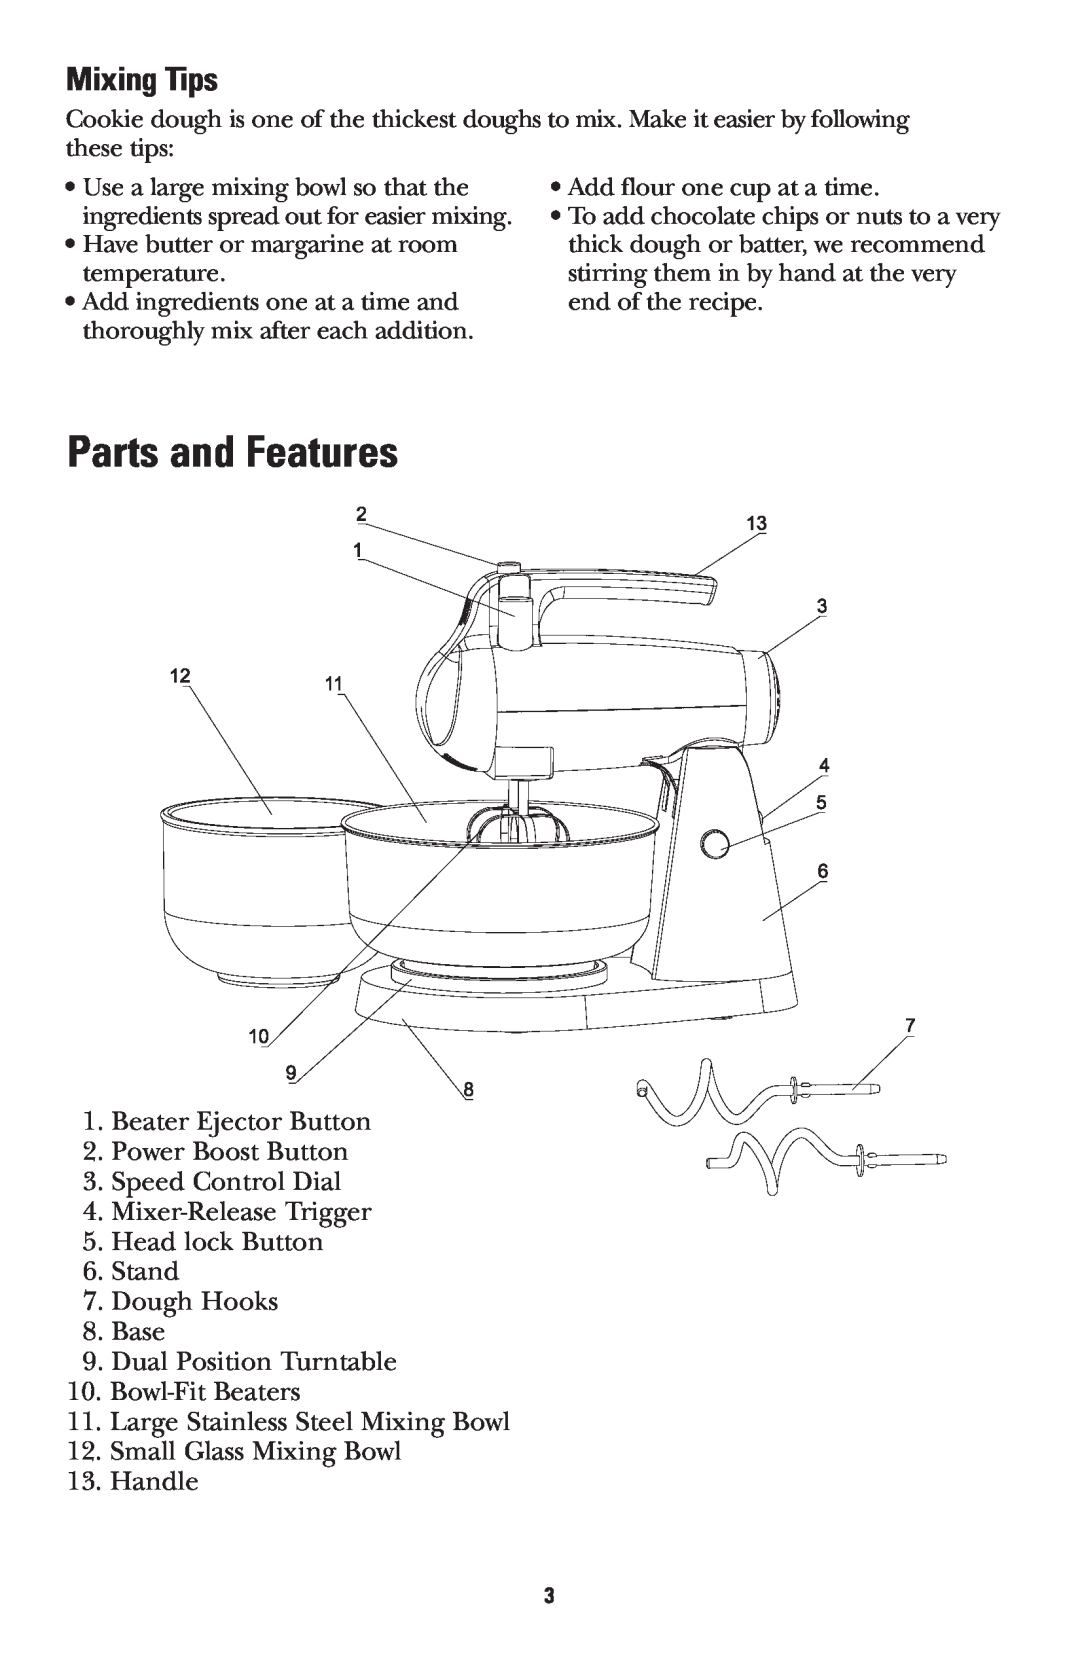 GE 681131689496 manual Parts and Features, Mixing Tips 